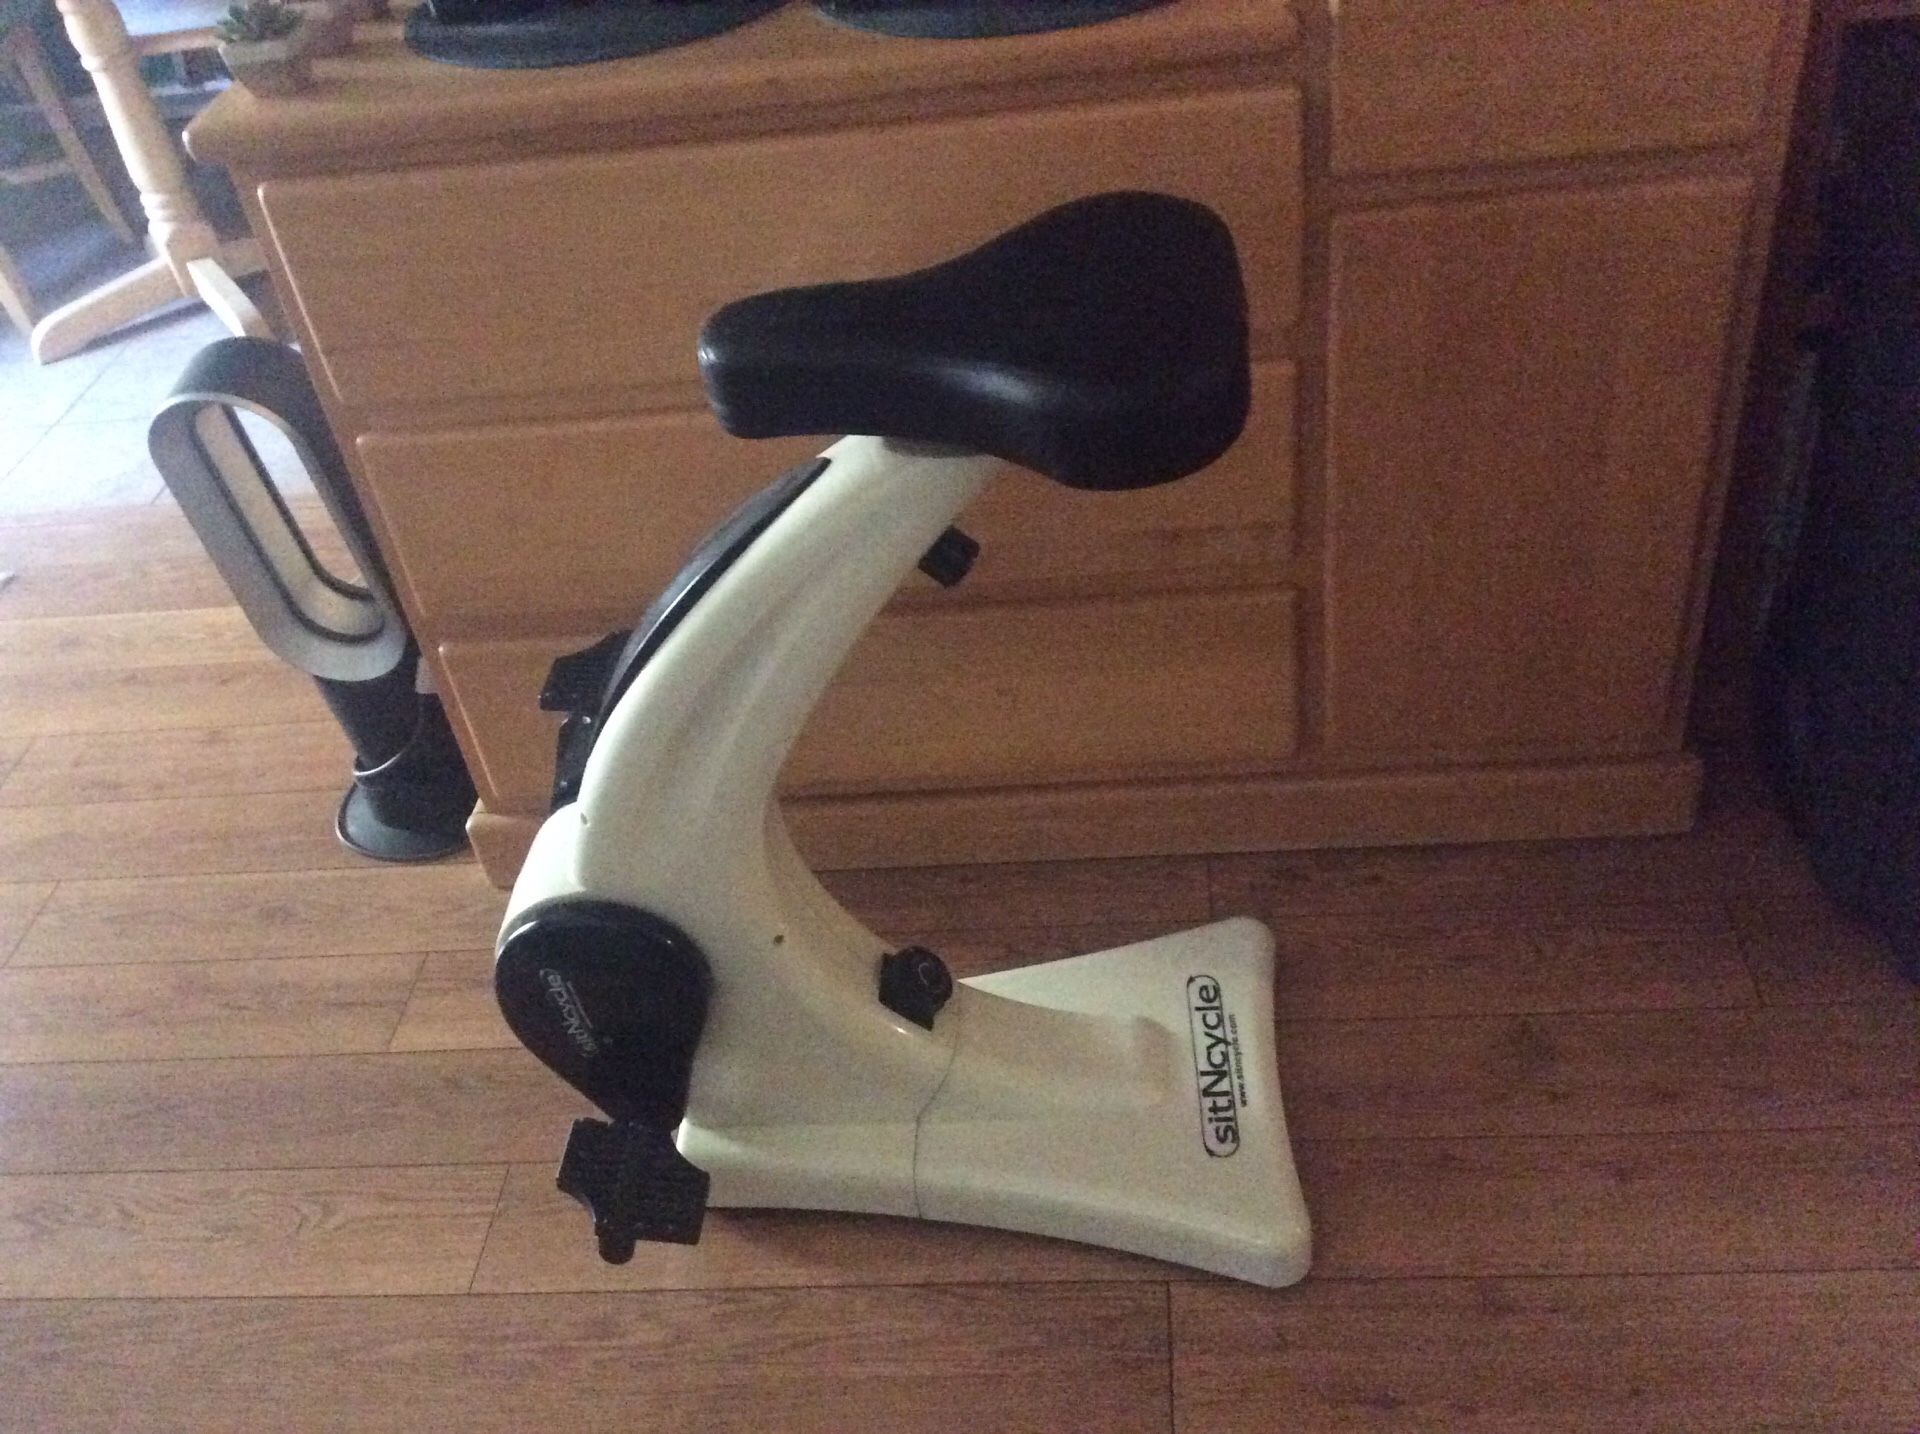 Sit n Cycle exercise bike. Cost $329.00new Only used a few times.Will sell for $ 75.00 or best offer